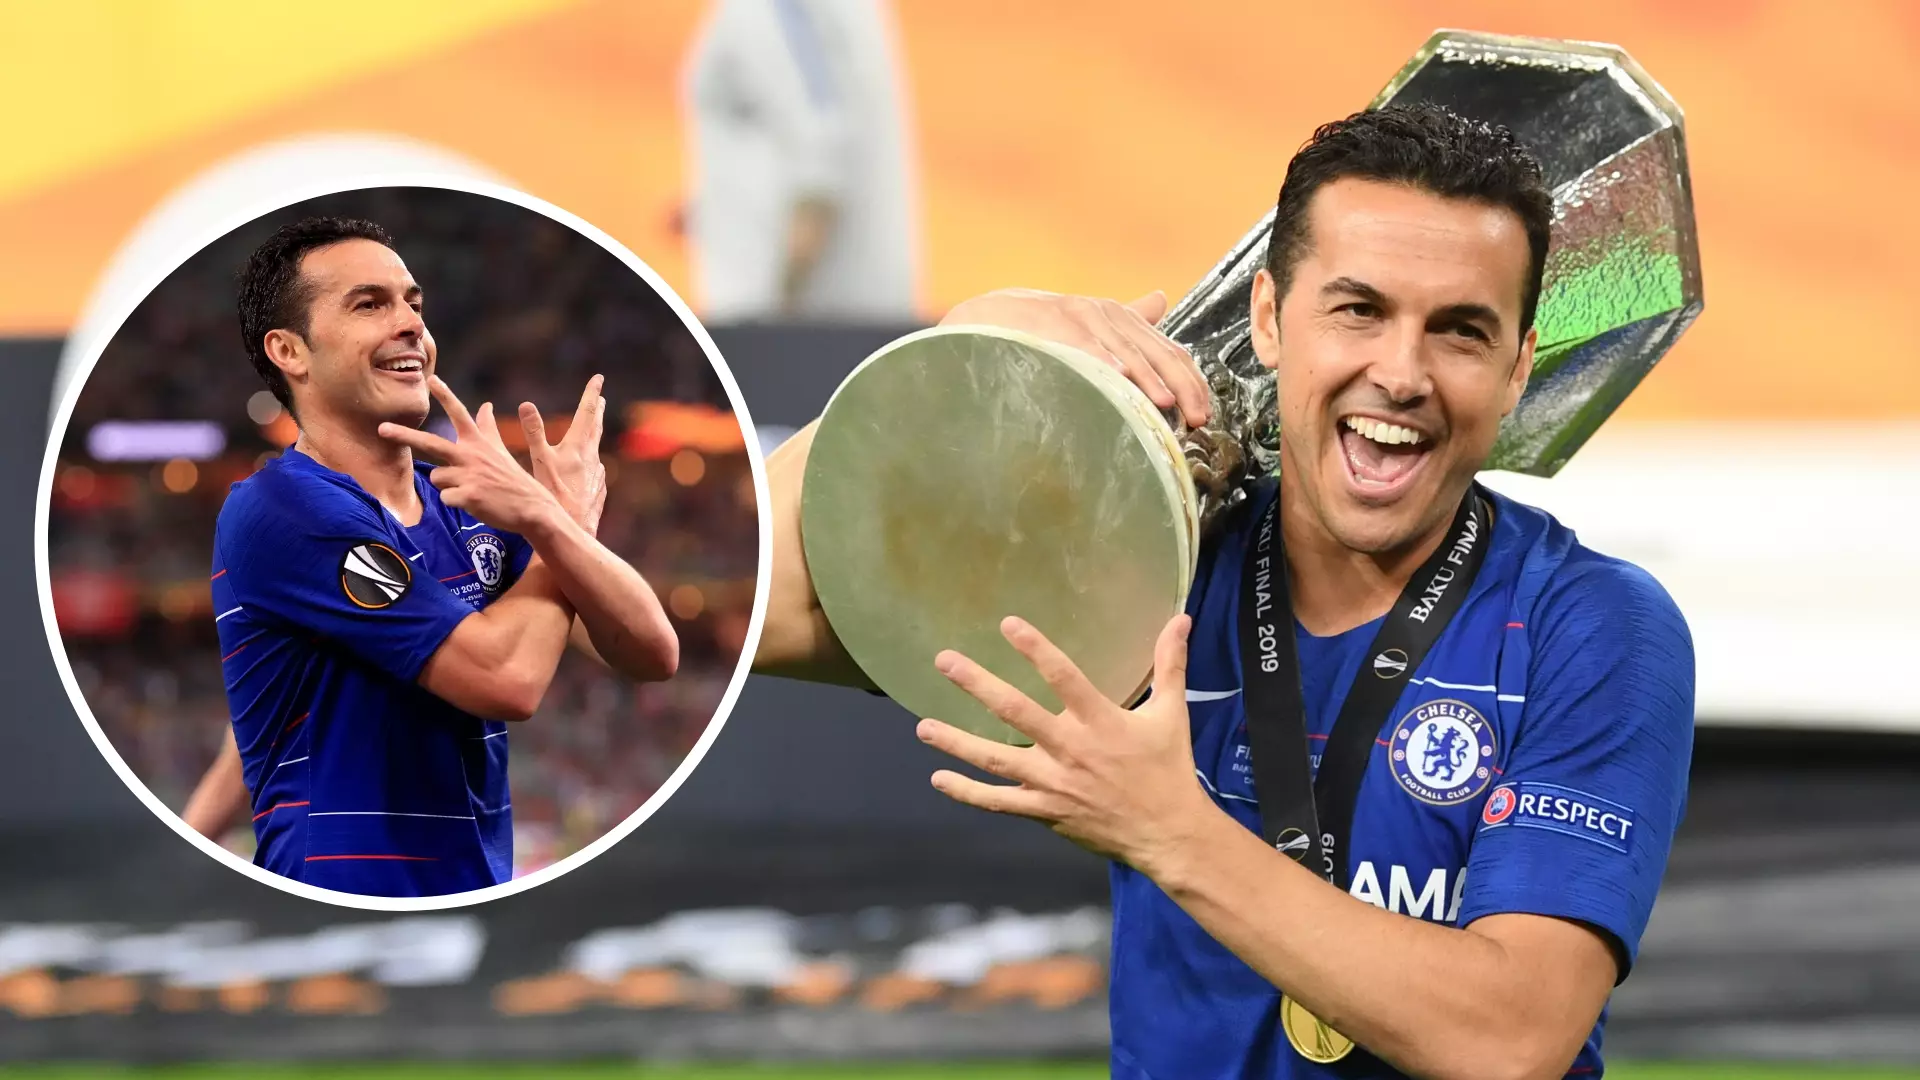 Pedro Becomes The First Player To Win Five Of Football's Biggest Trophies